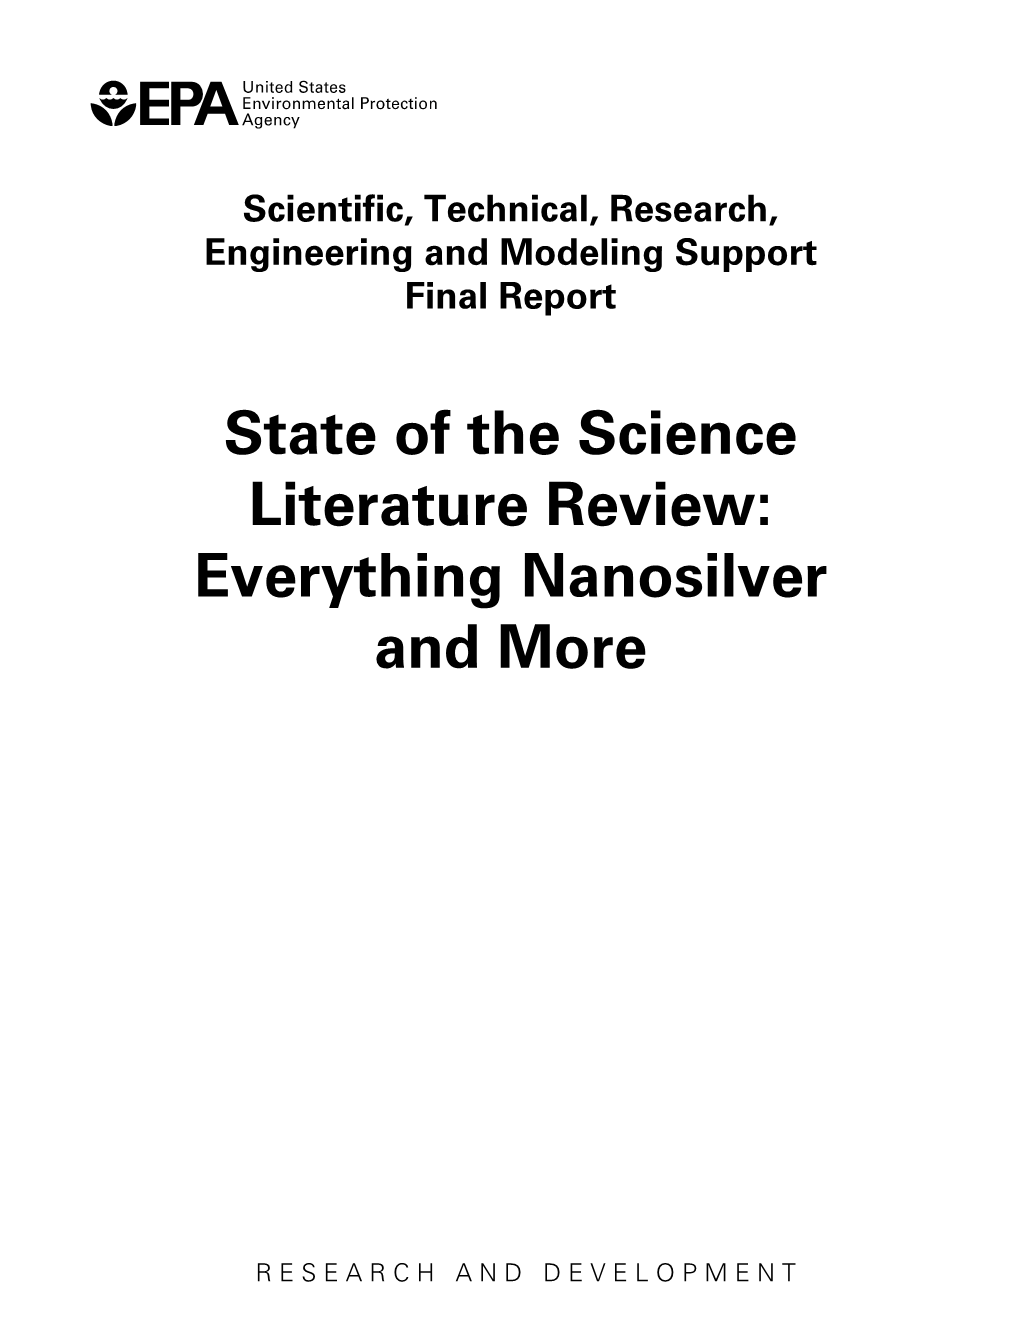 State of the Science Literature Review: Everything Nanosilver and More